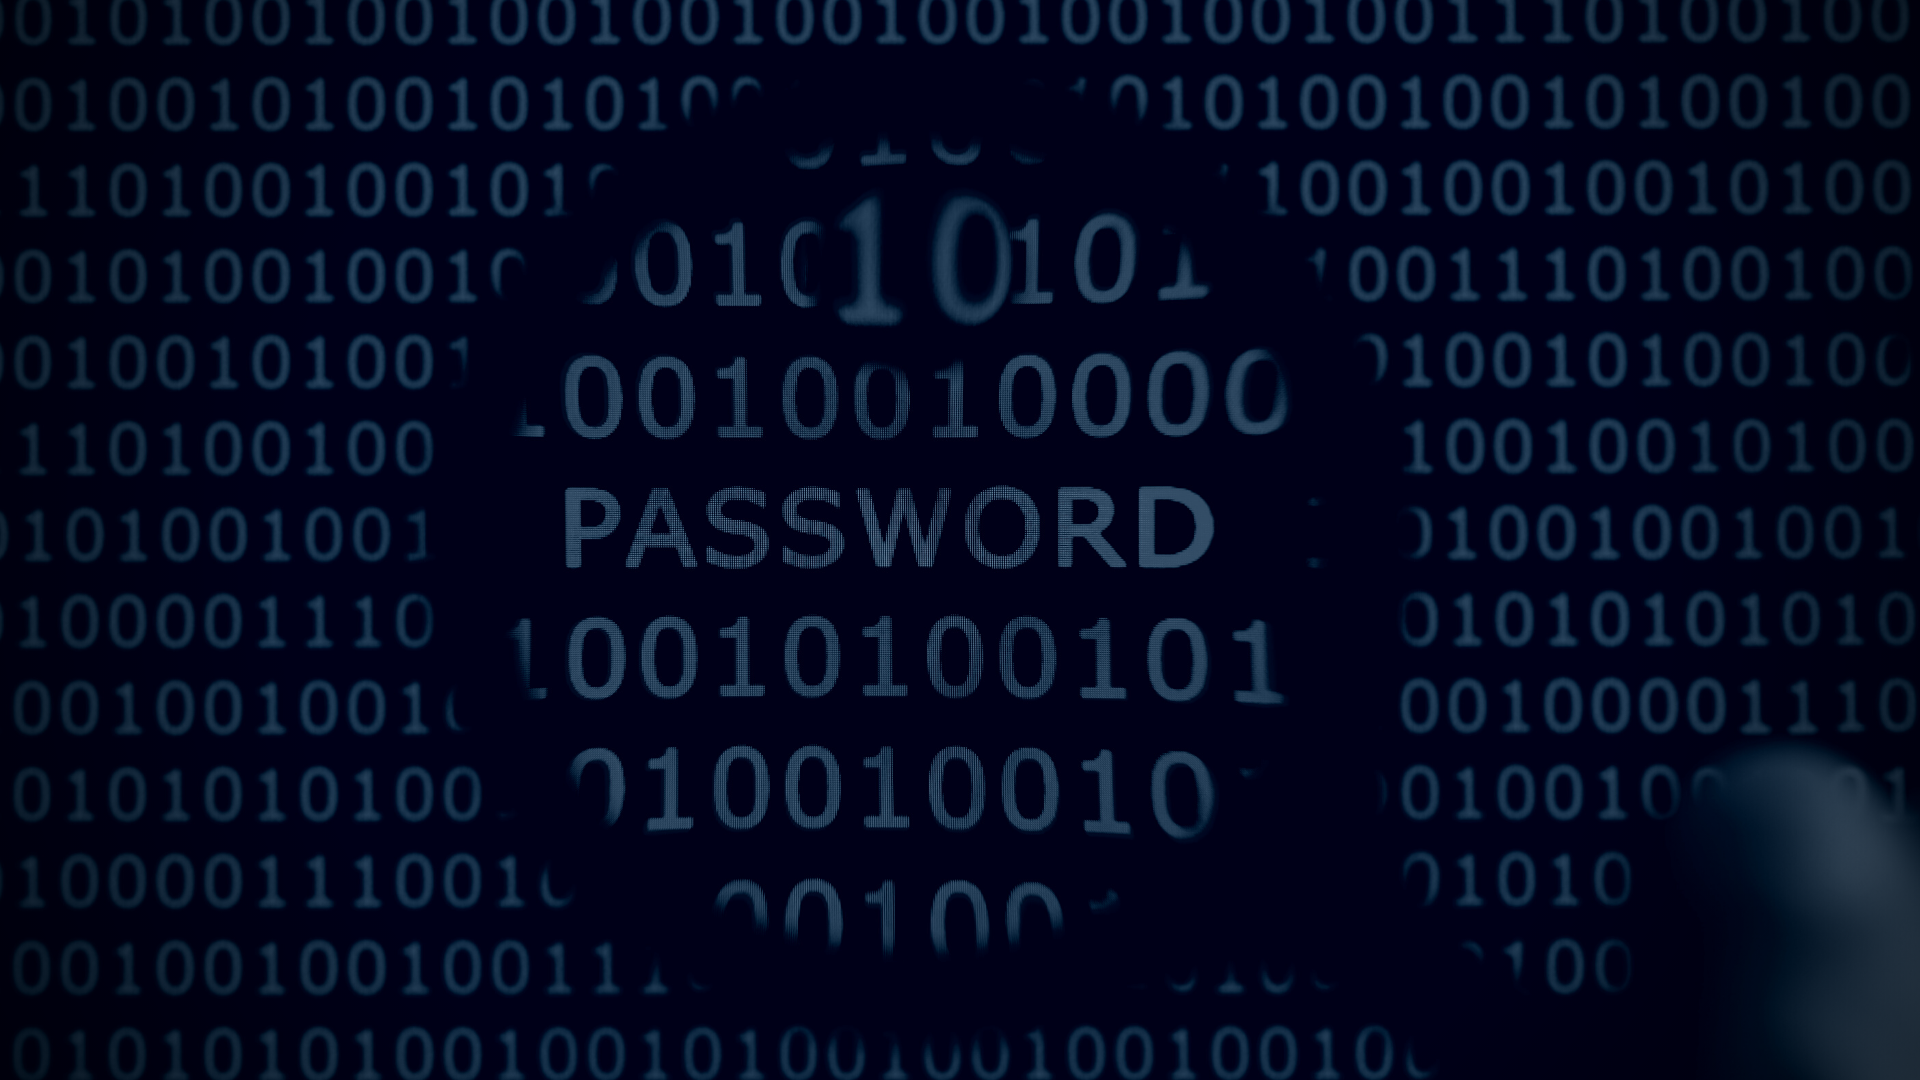 Attacking LastPass: Compromising an Entire Password Database